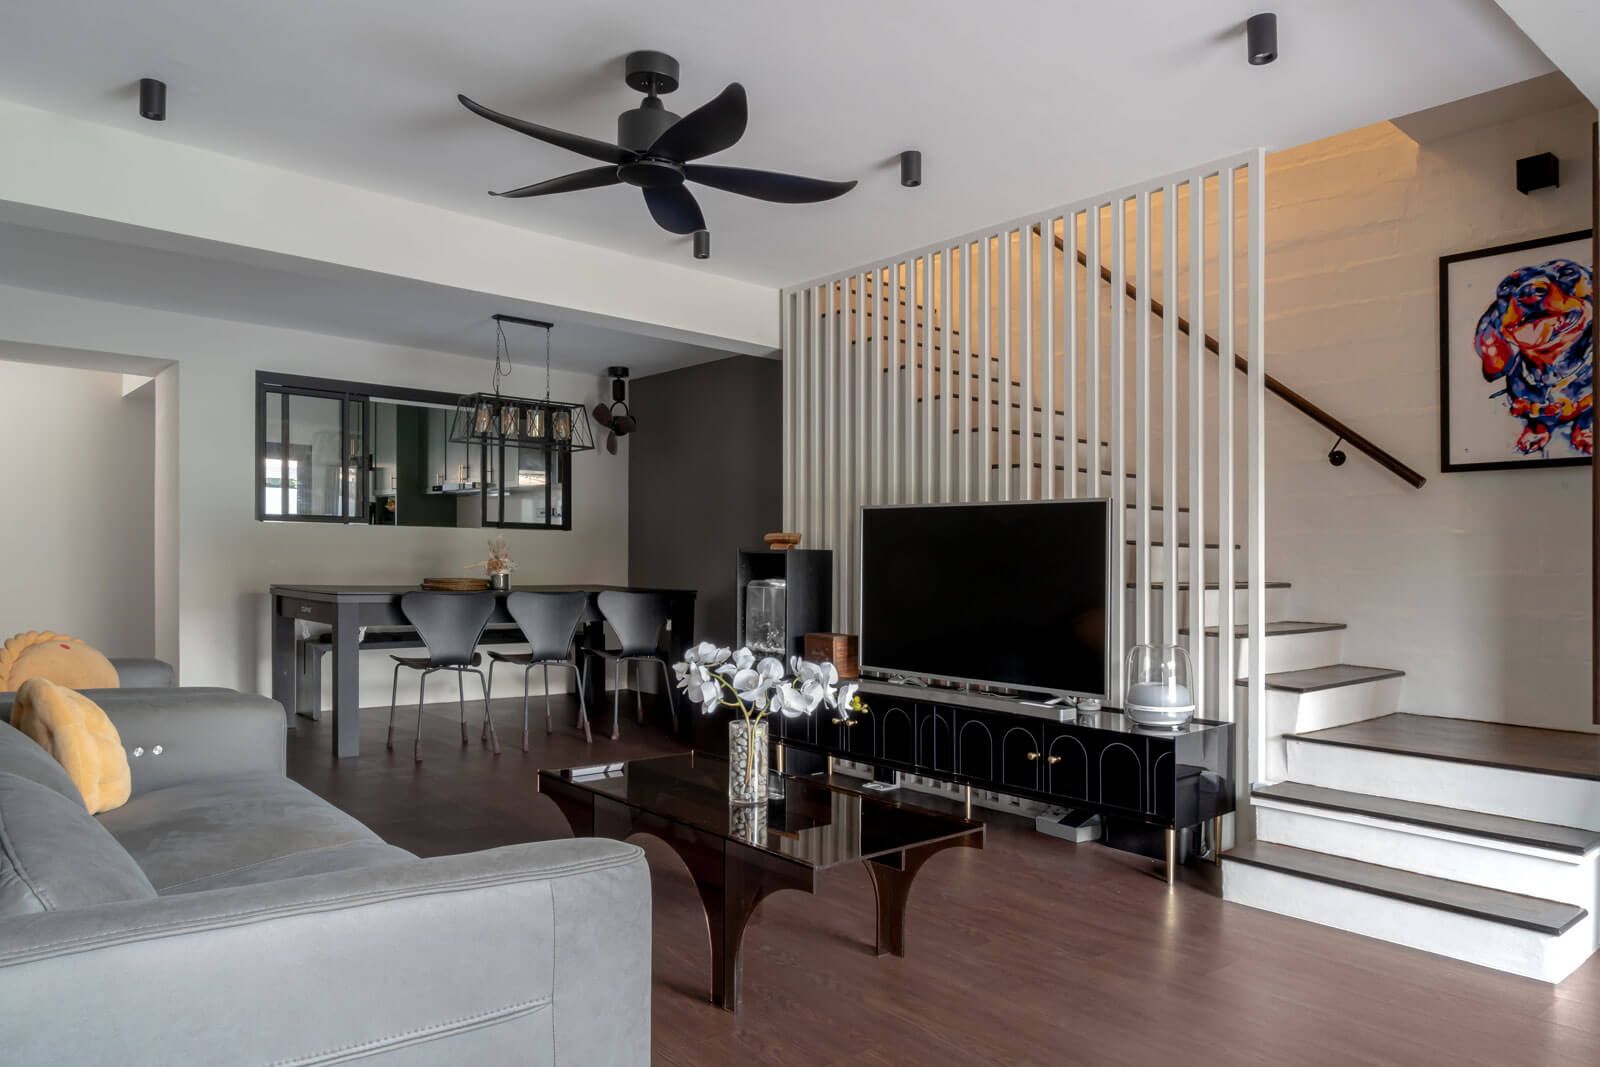 Open-plan living space with a sleek TV console against a wooden slatted partition, complemented by a contemporary dining area, artistic decor, and a statement staircase in a stylish home.